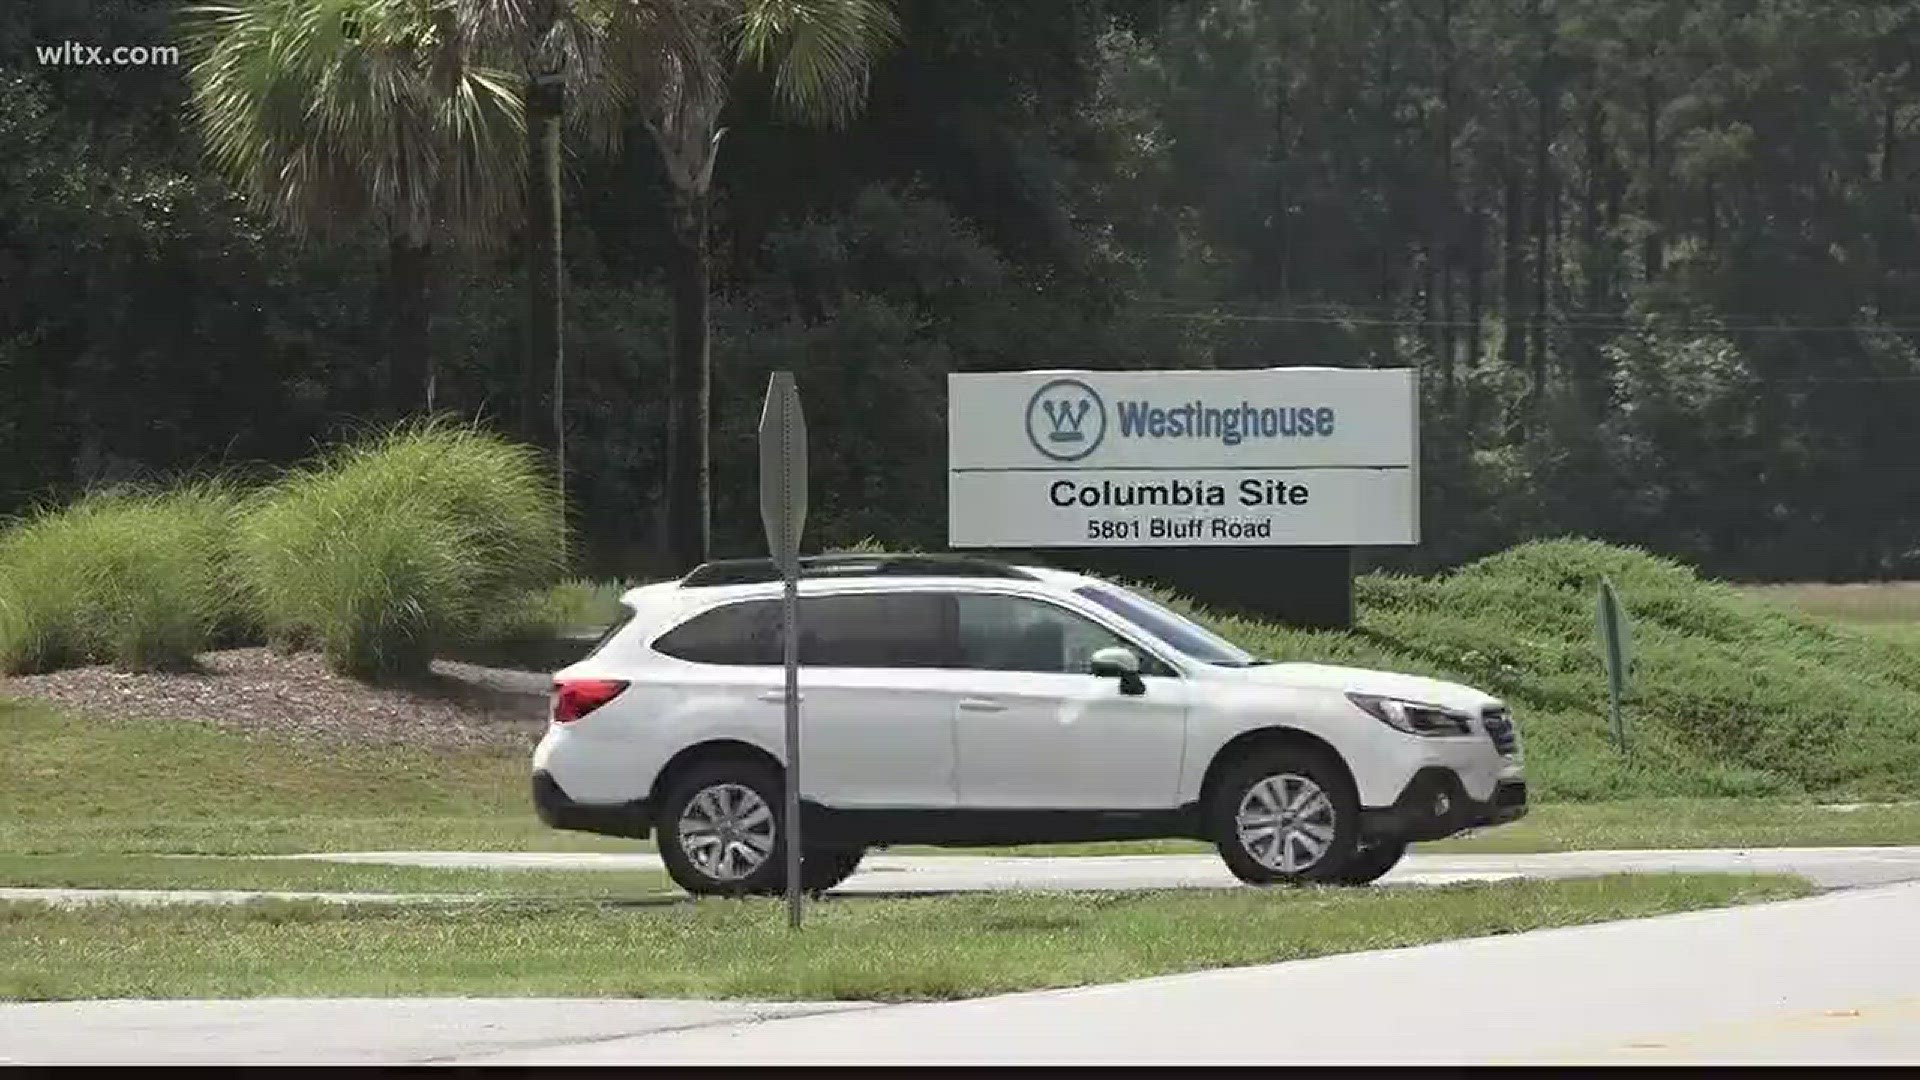 Radioactive uranium leaked through the floor at the Westinghouse plant right outside of downtown Columbia.